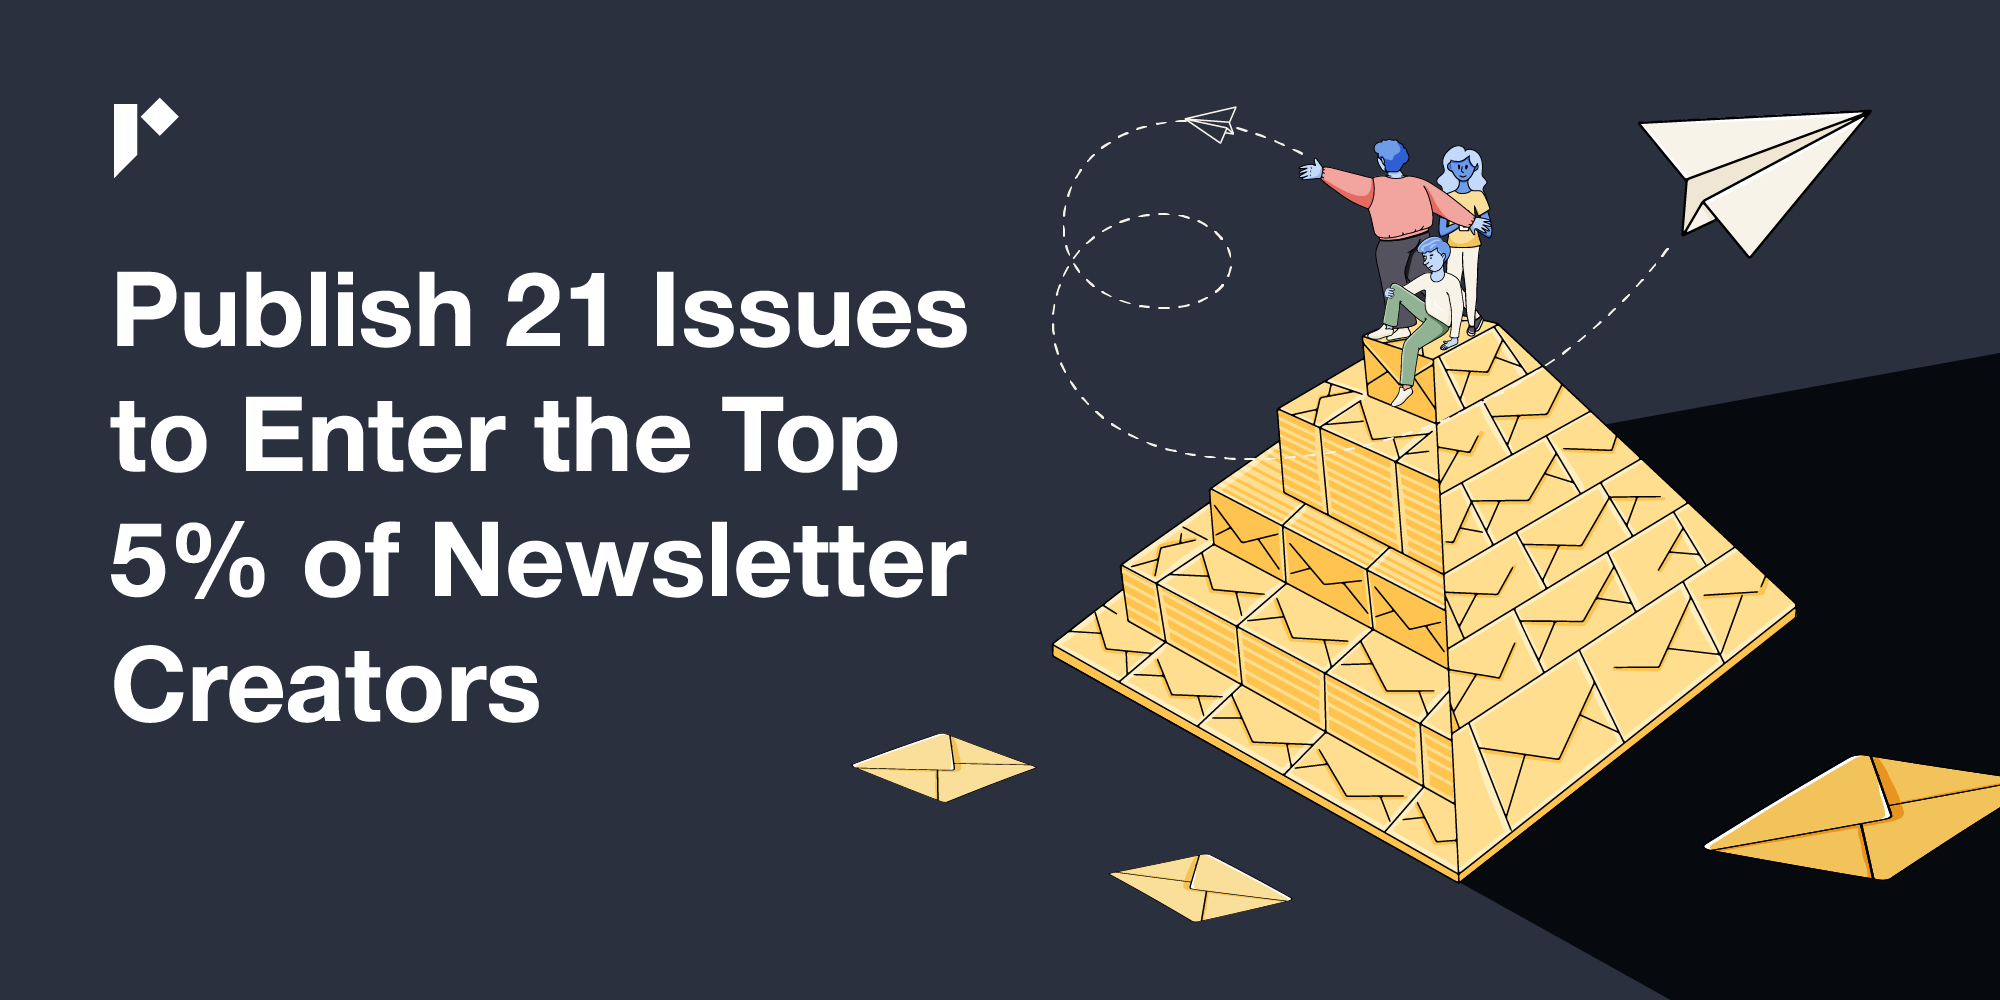 Publish 21 Issues to Enter the Top 5% of Newsletter Creators